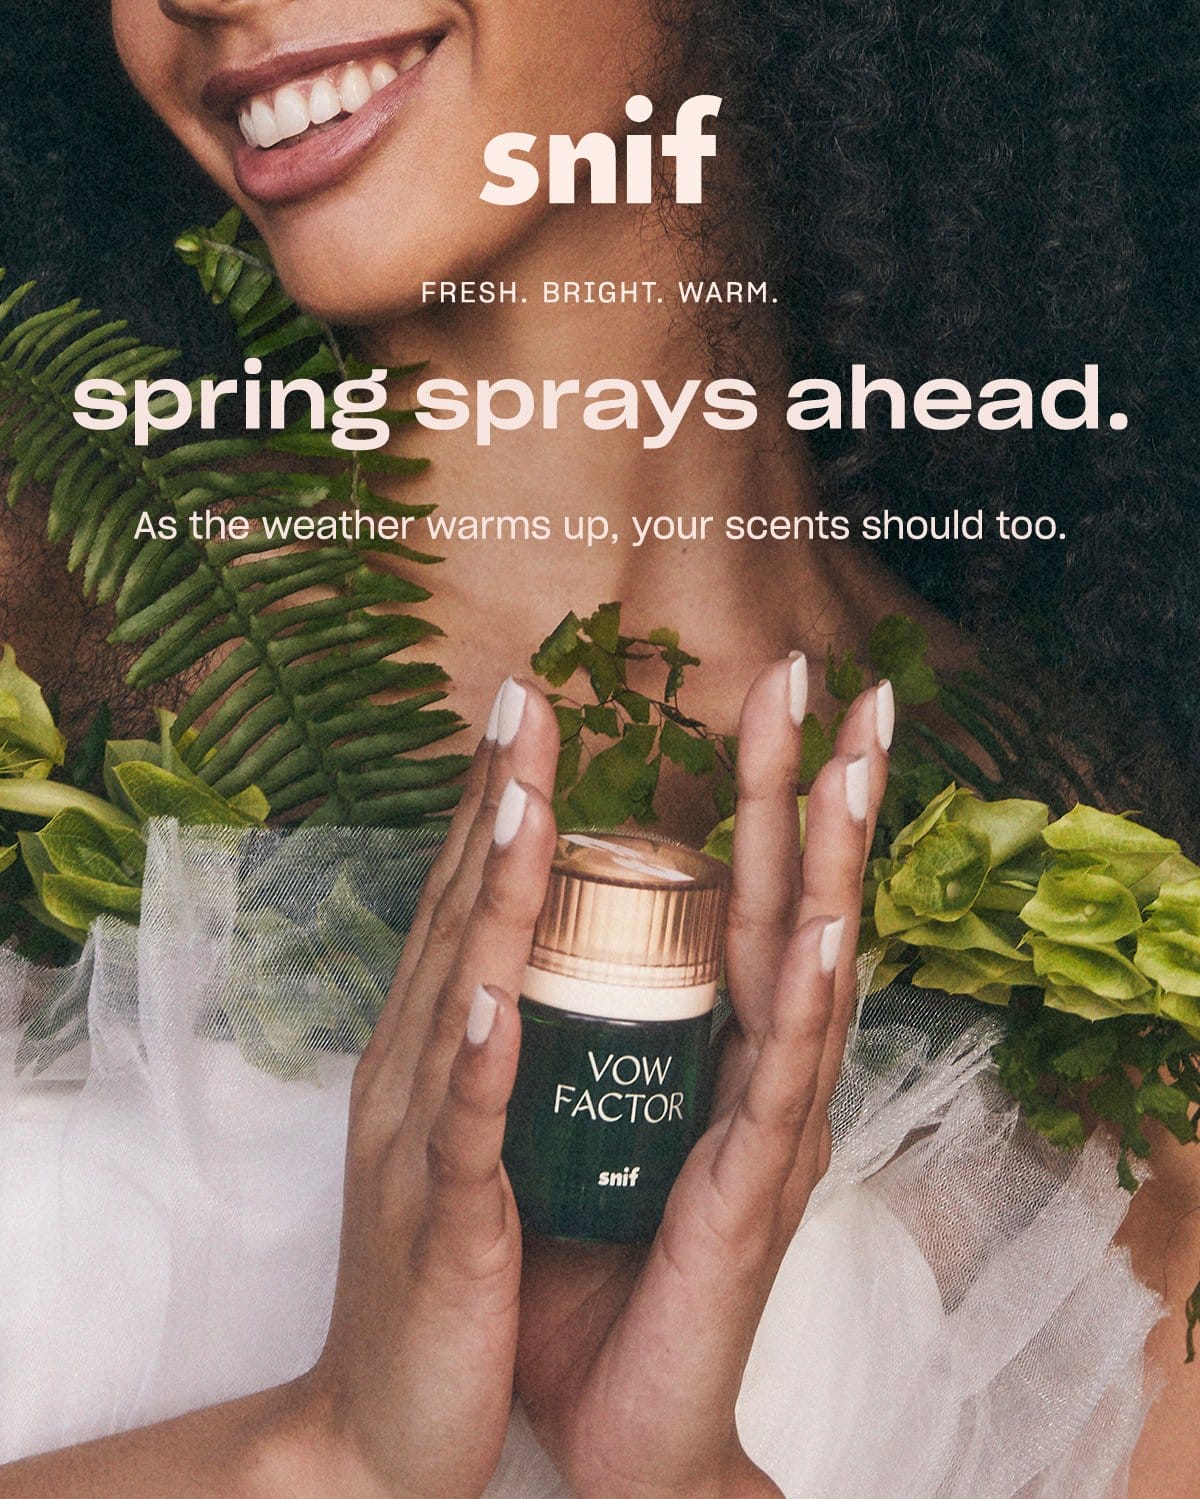 As the weather warms up, your scents should too.